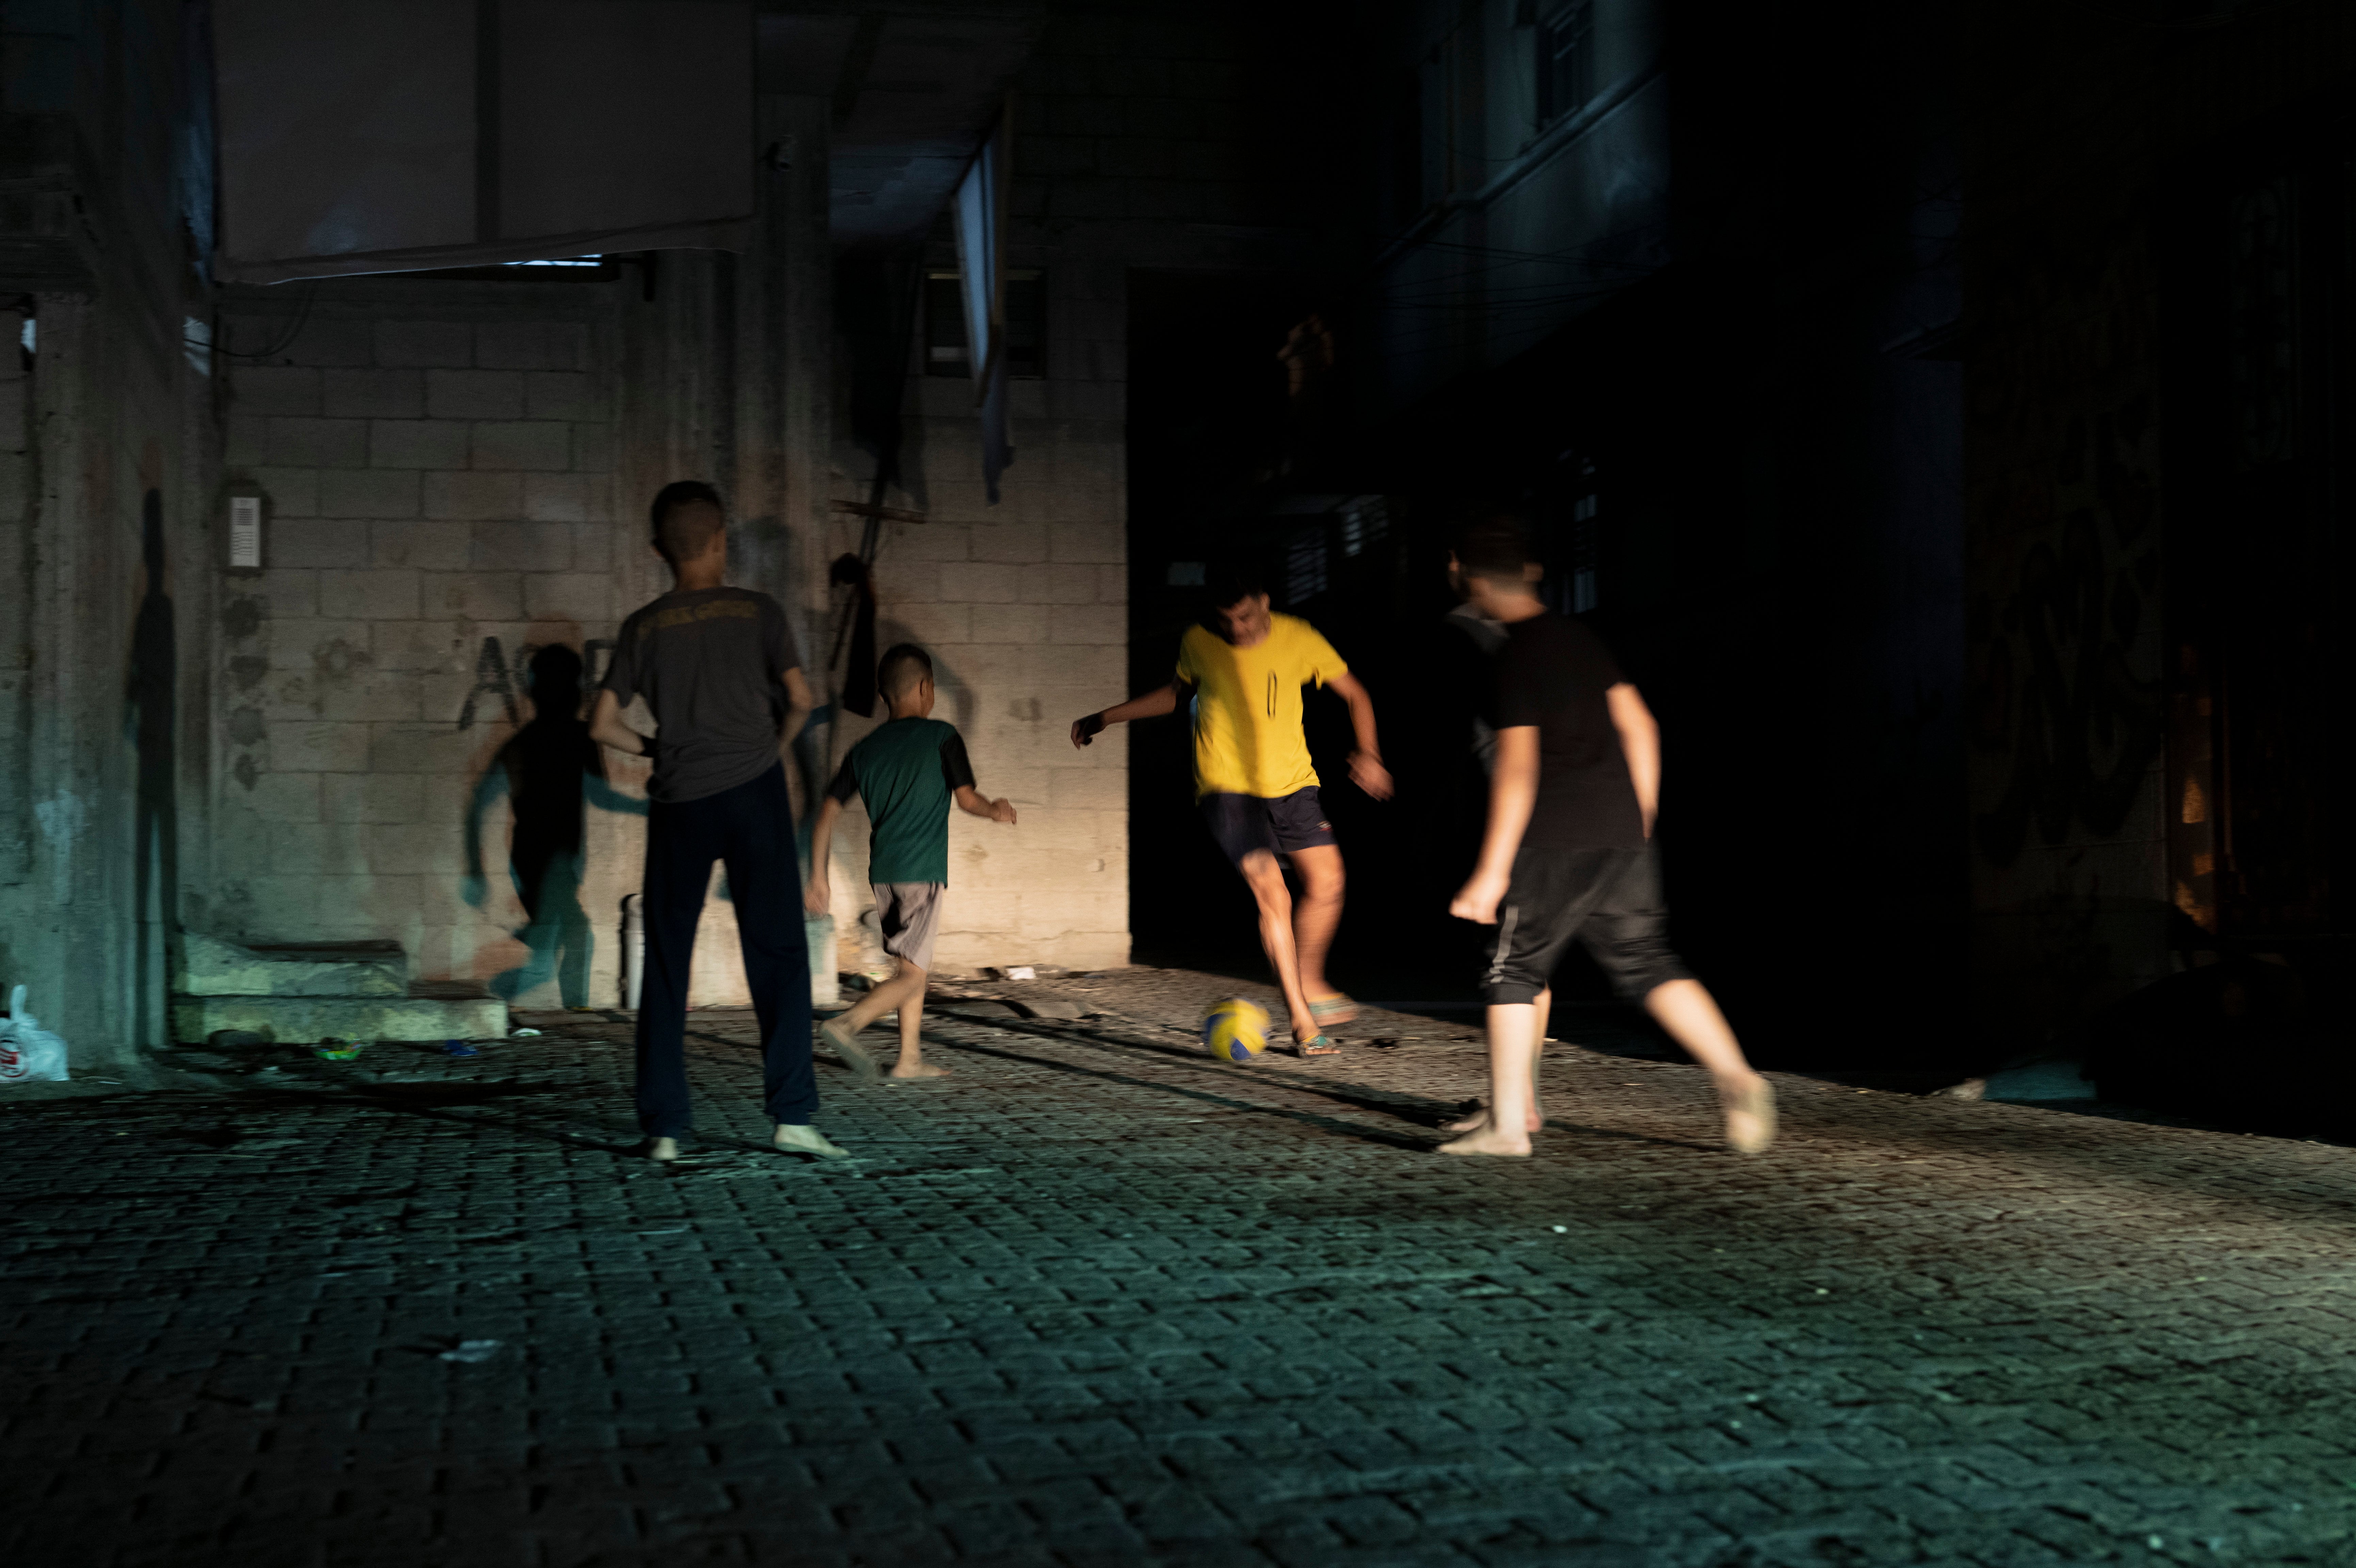 Children of Shati camp play football in the pitch-black streets and alleyways using only the headlights of passing cars